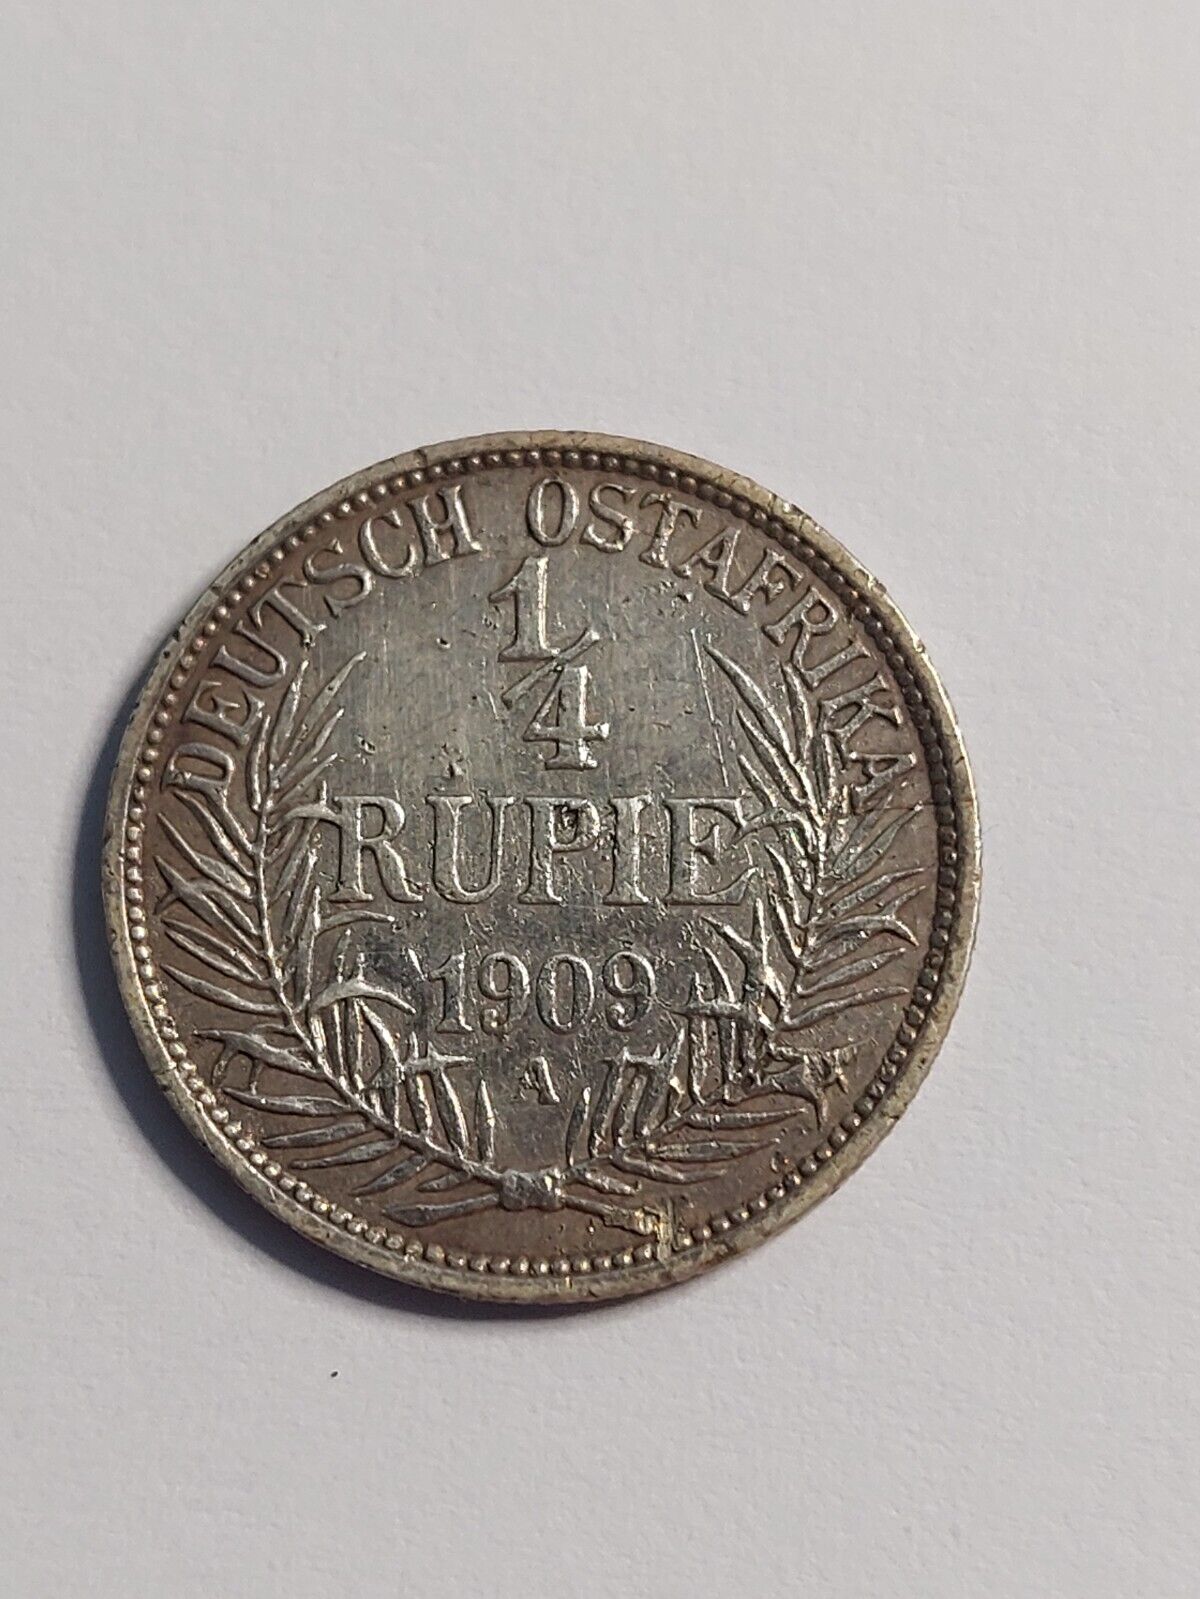 German East Africa William II 1/4 Rupee 1909 Collector Coins Silver Coin(G34)